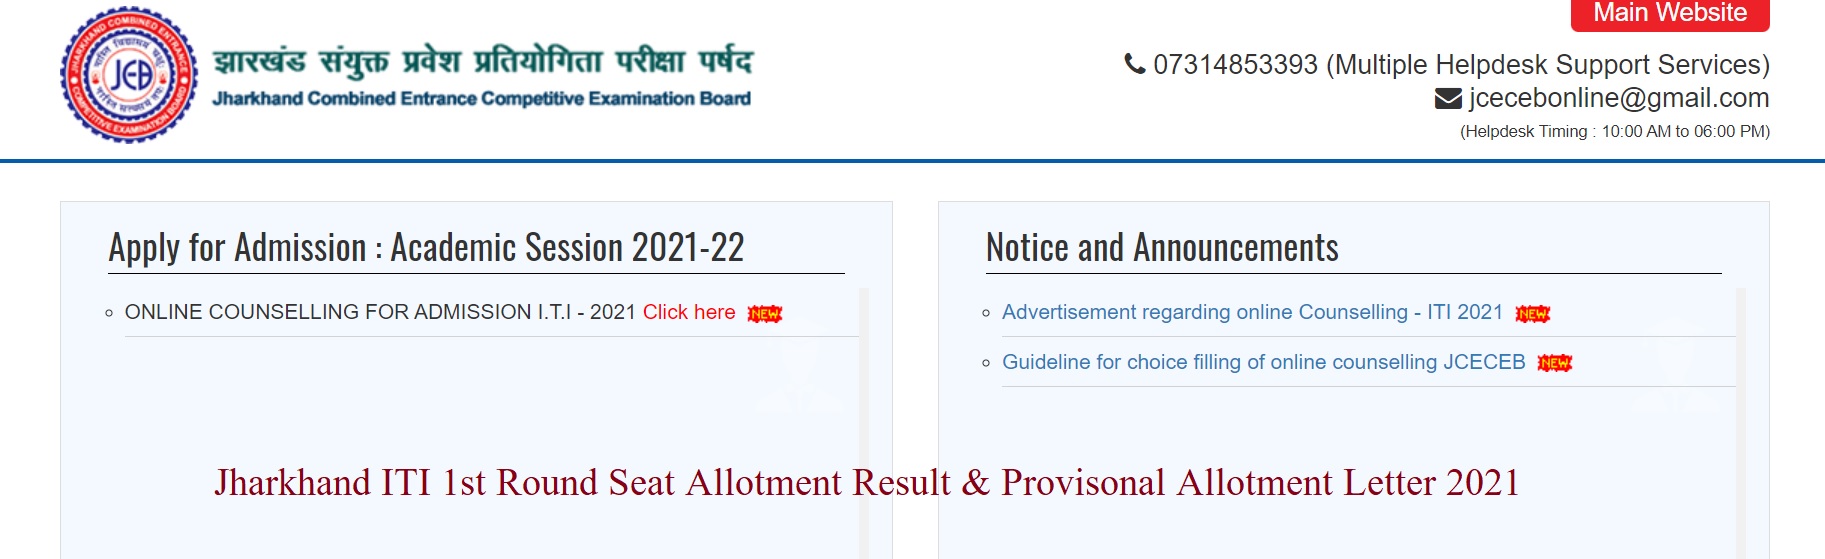 Jharkhand ITI 1st Round Seat Allotment Result 2021- Allotment Letter PDF